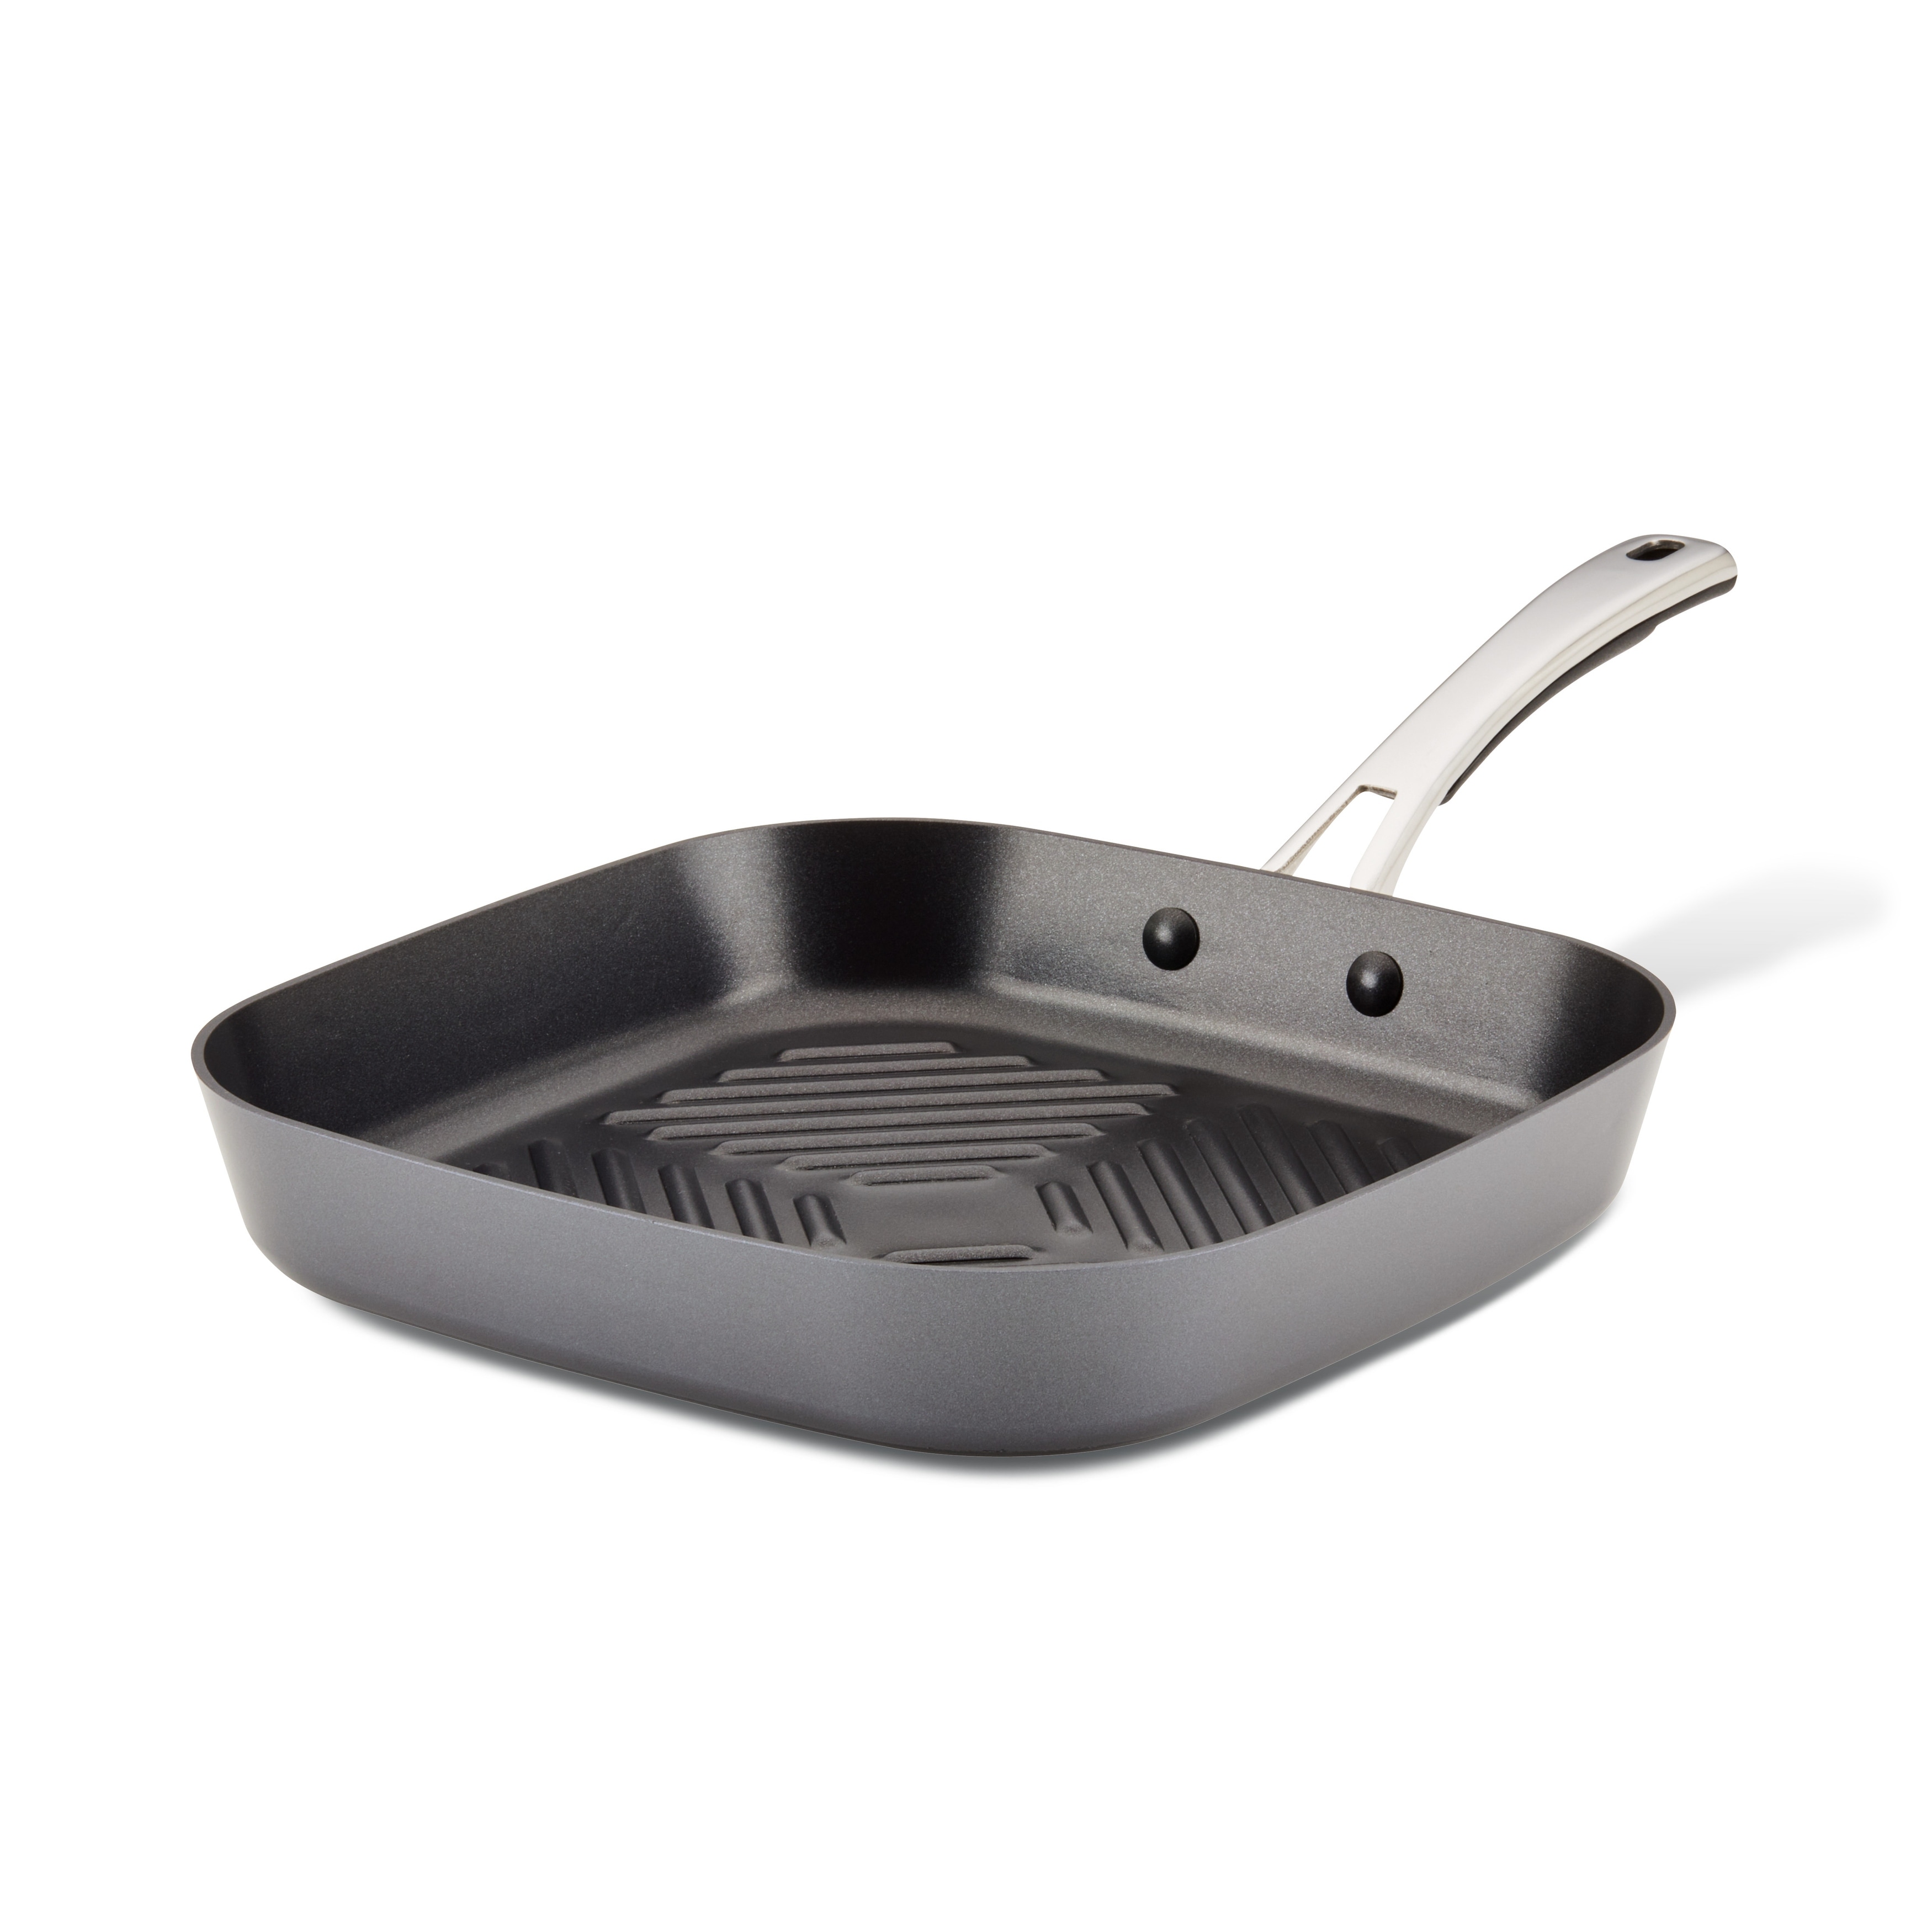 https://ak1.ostkcdn.com/images/products/is/images/direct/9074bb8efbff44d61ceffaf6b06fb1fd4219985c/Rachael-Ray-Cook-%2B-Create-Hard-Anodized-Nonstick-Deep-Grill-Pan%2C-11-Inch%2C-Black.jpg